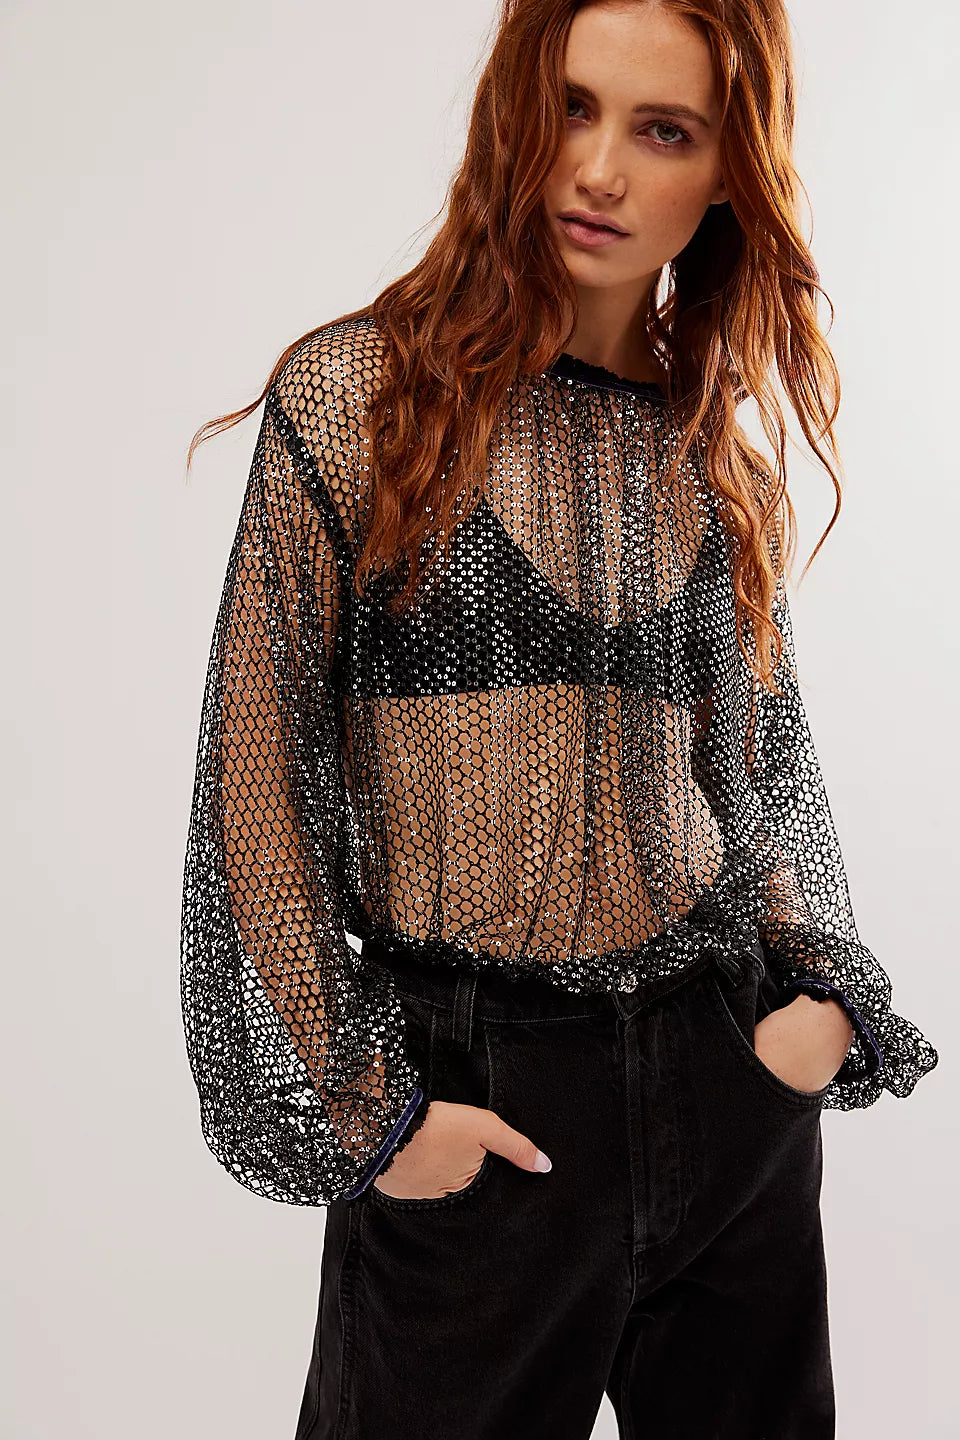 Free people sparks fly top